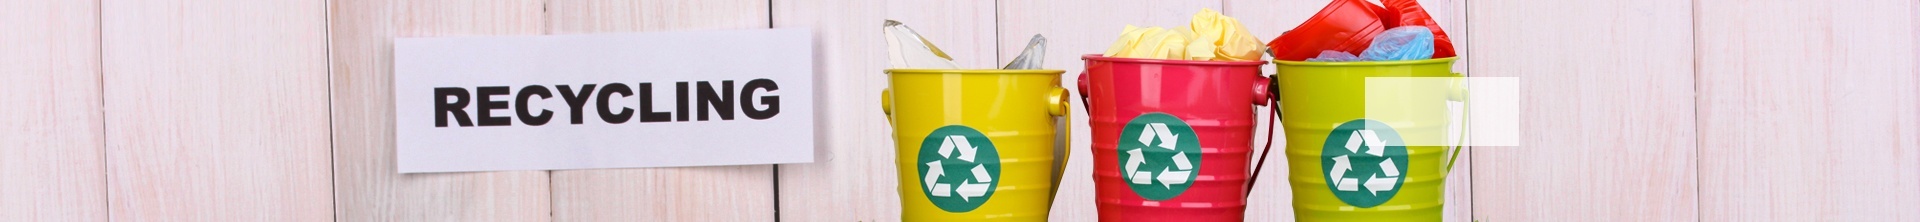 Recycling  and Reuse